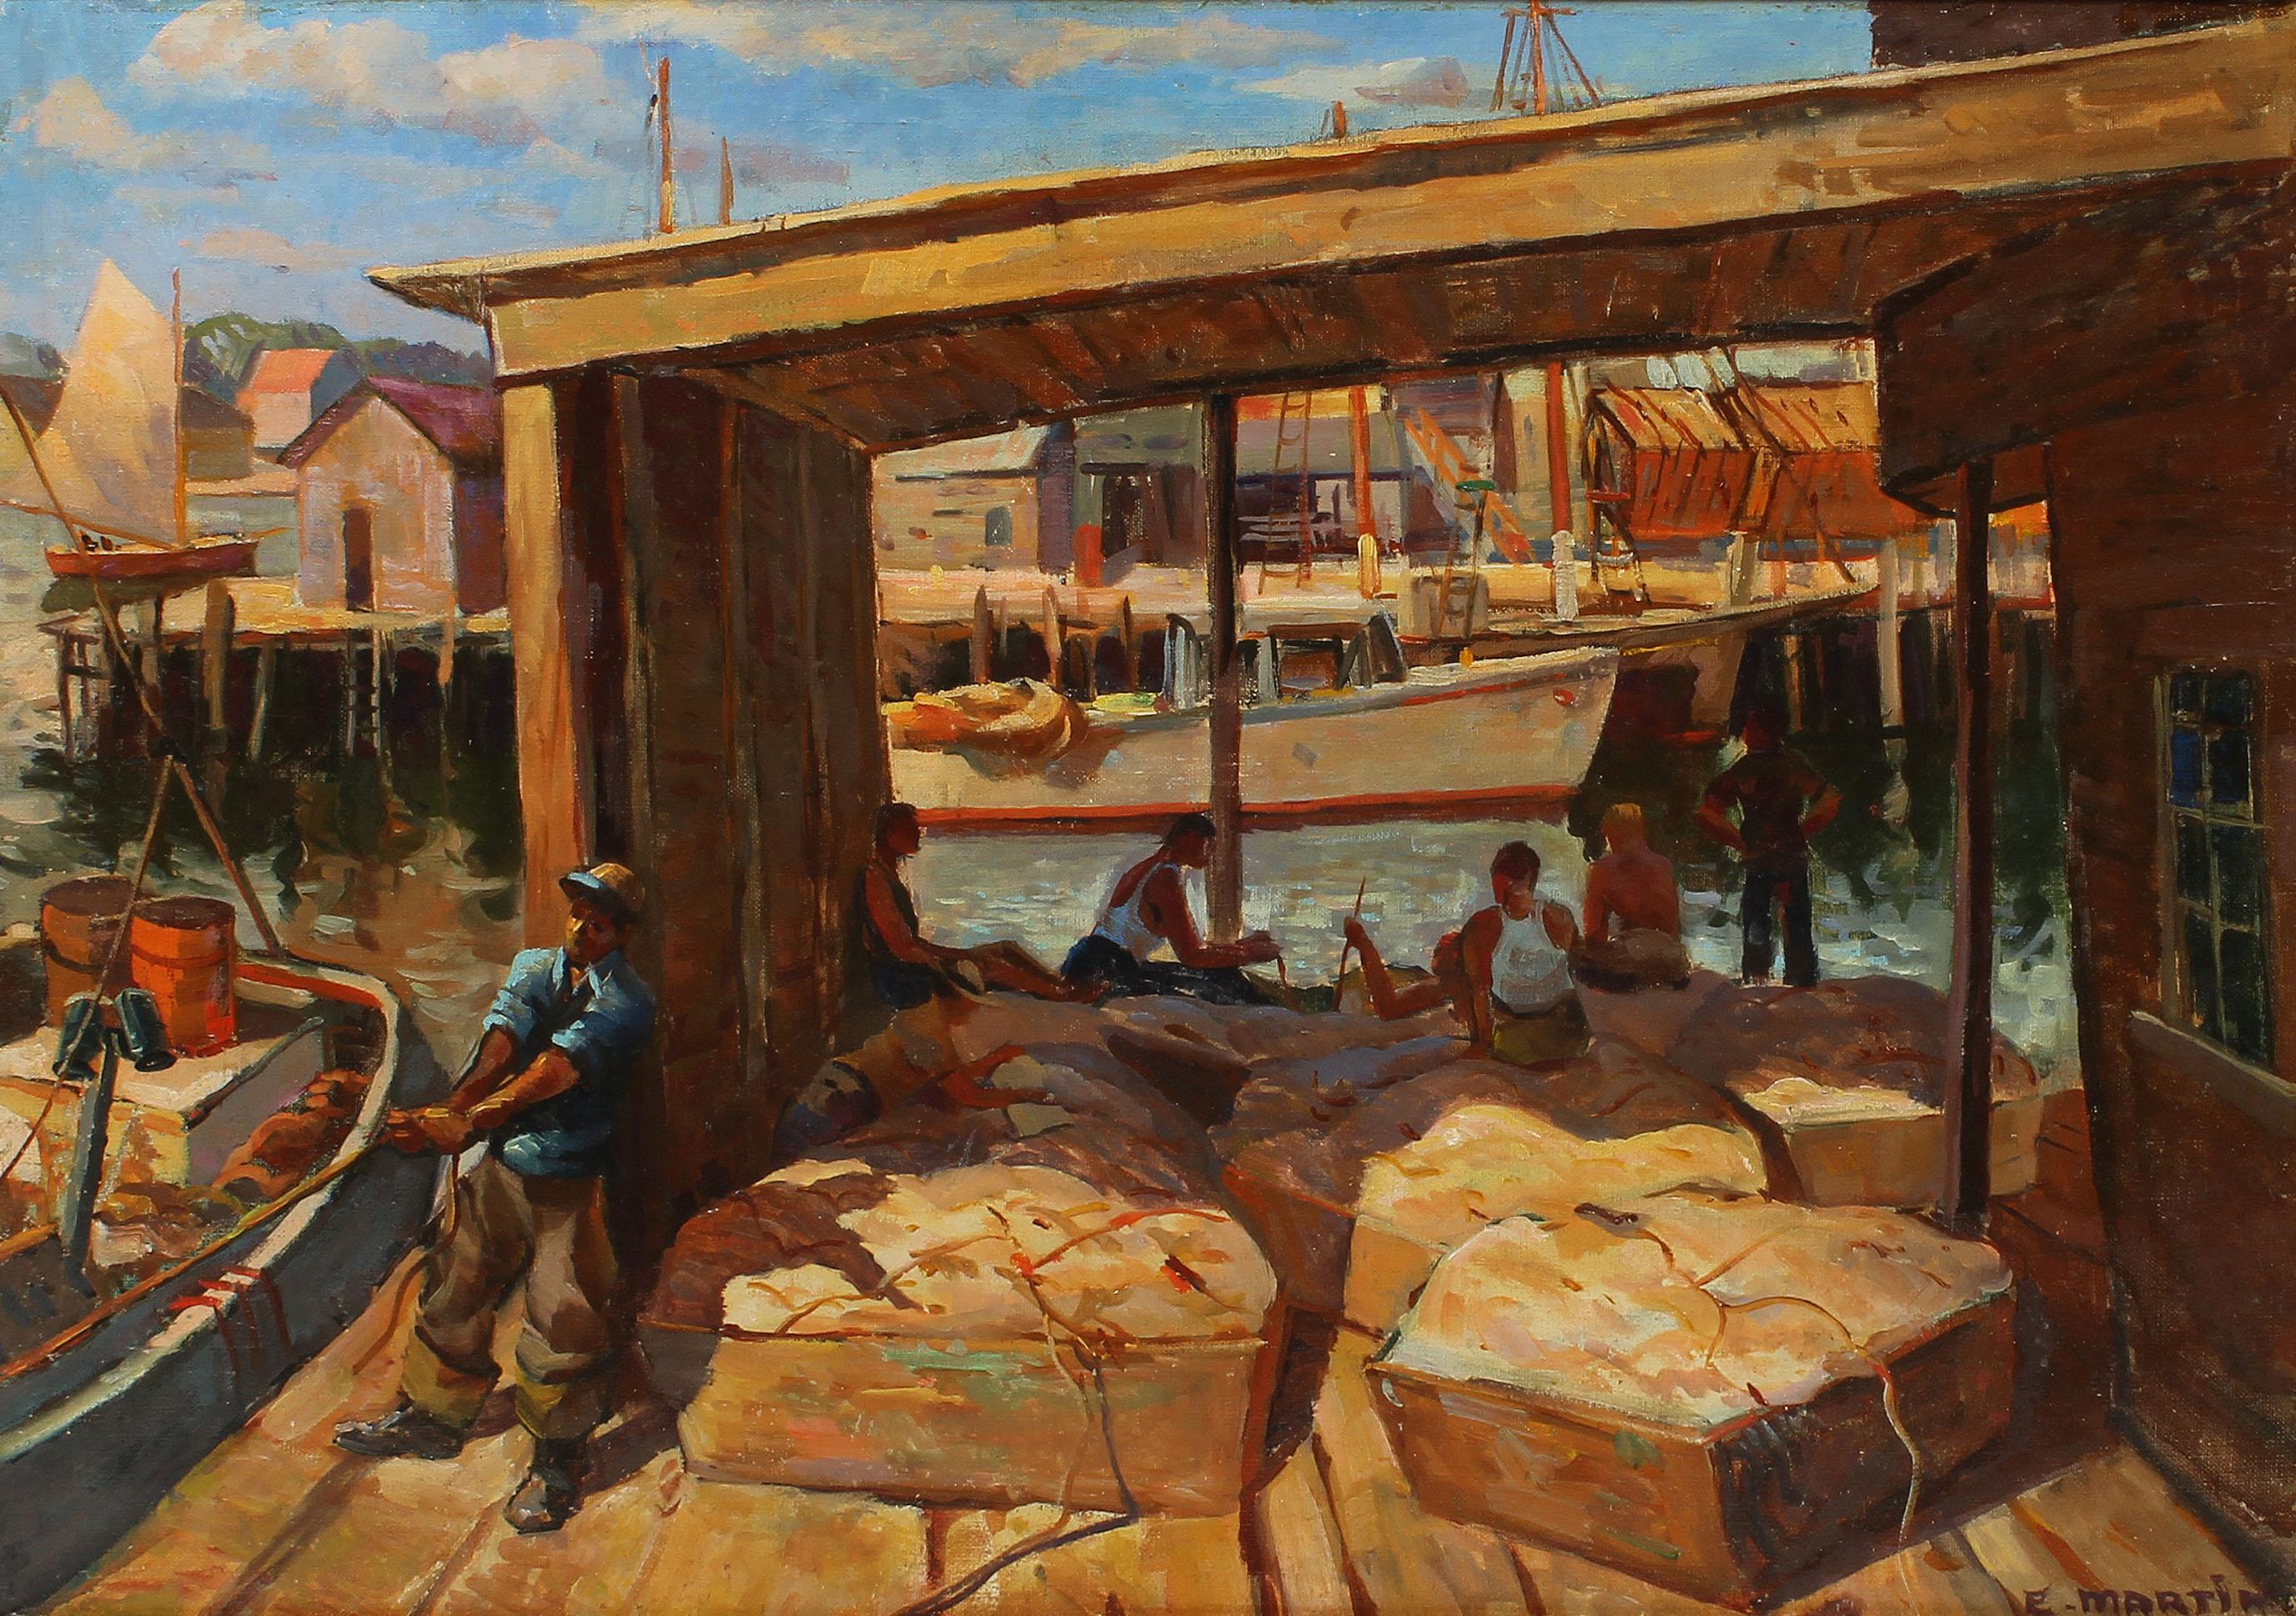 Antique American modernist wpa fishing dock oil painting.  Oil on board, circa 1940. Signed lower right.  Displayed in a period modern frame.  Image, 24